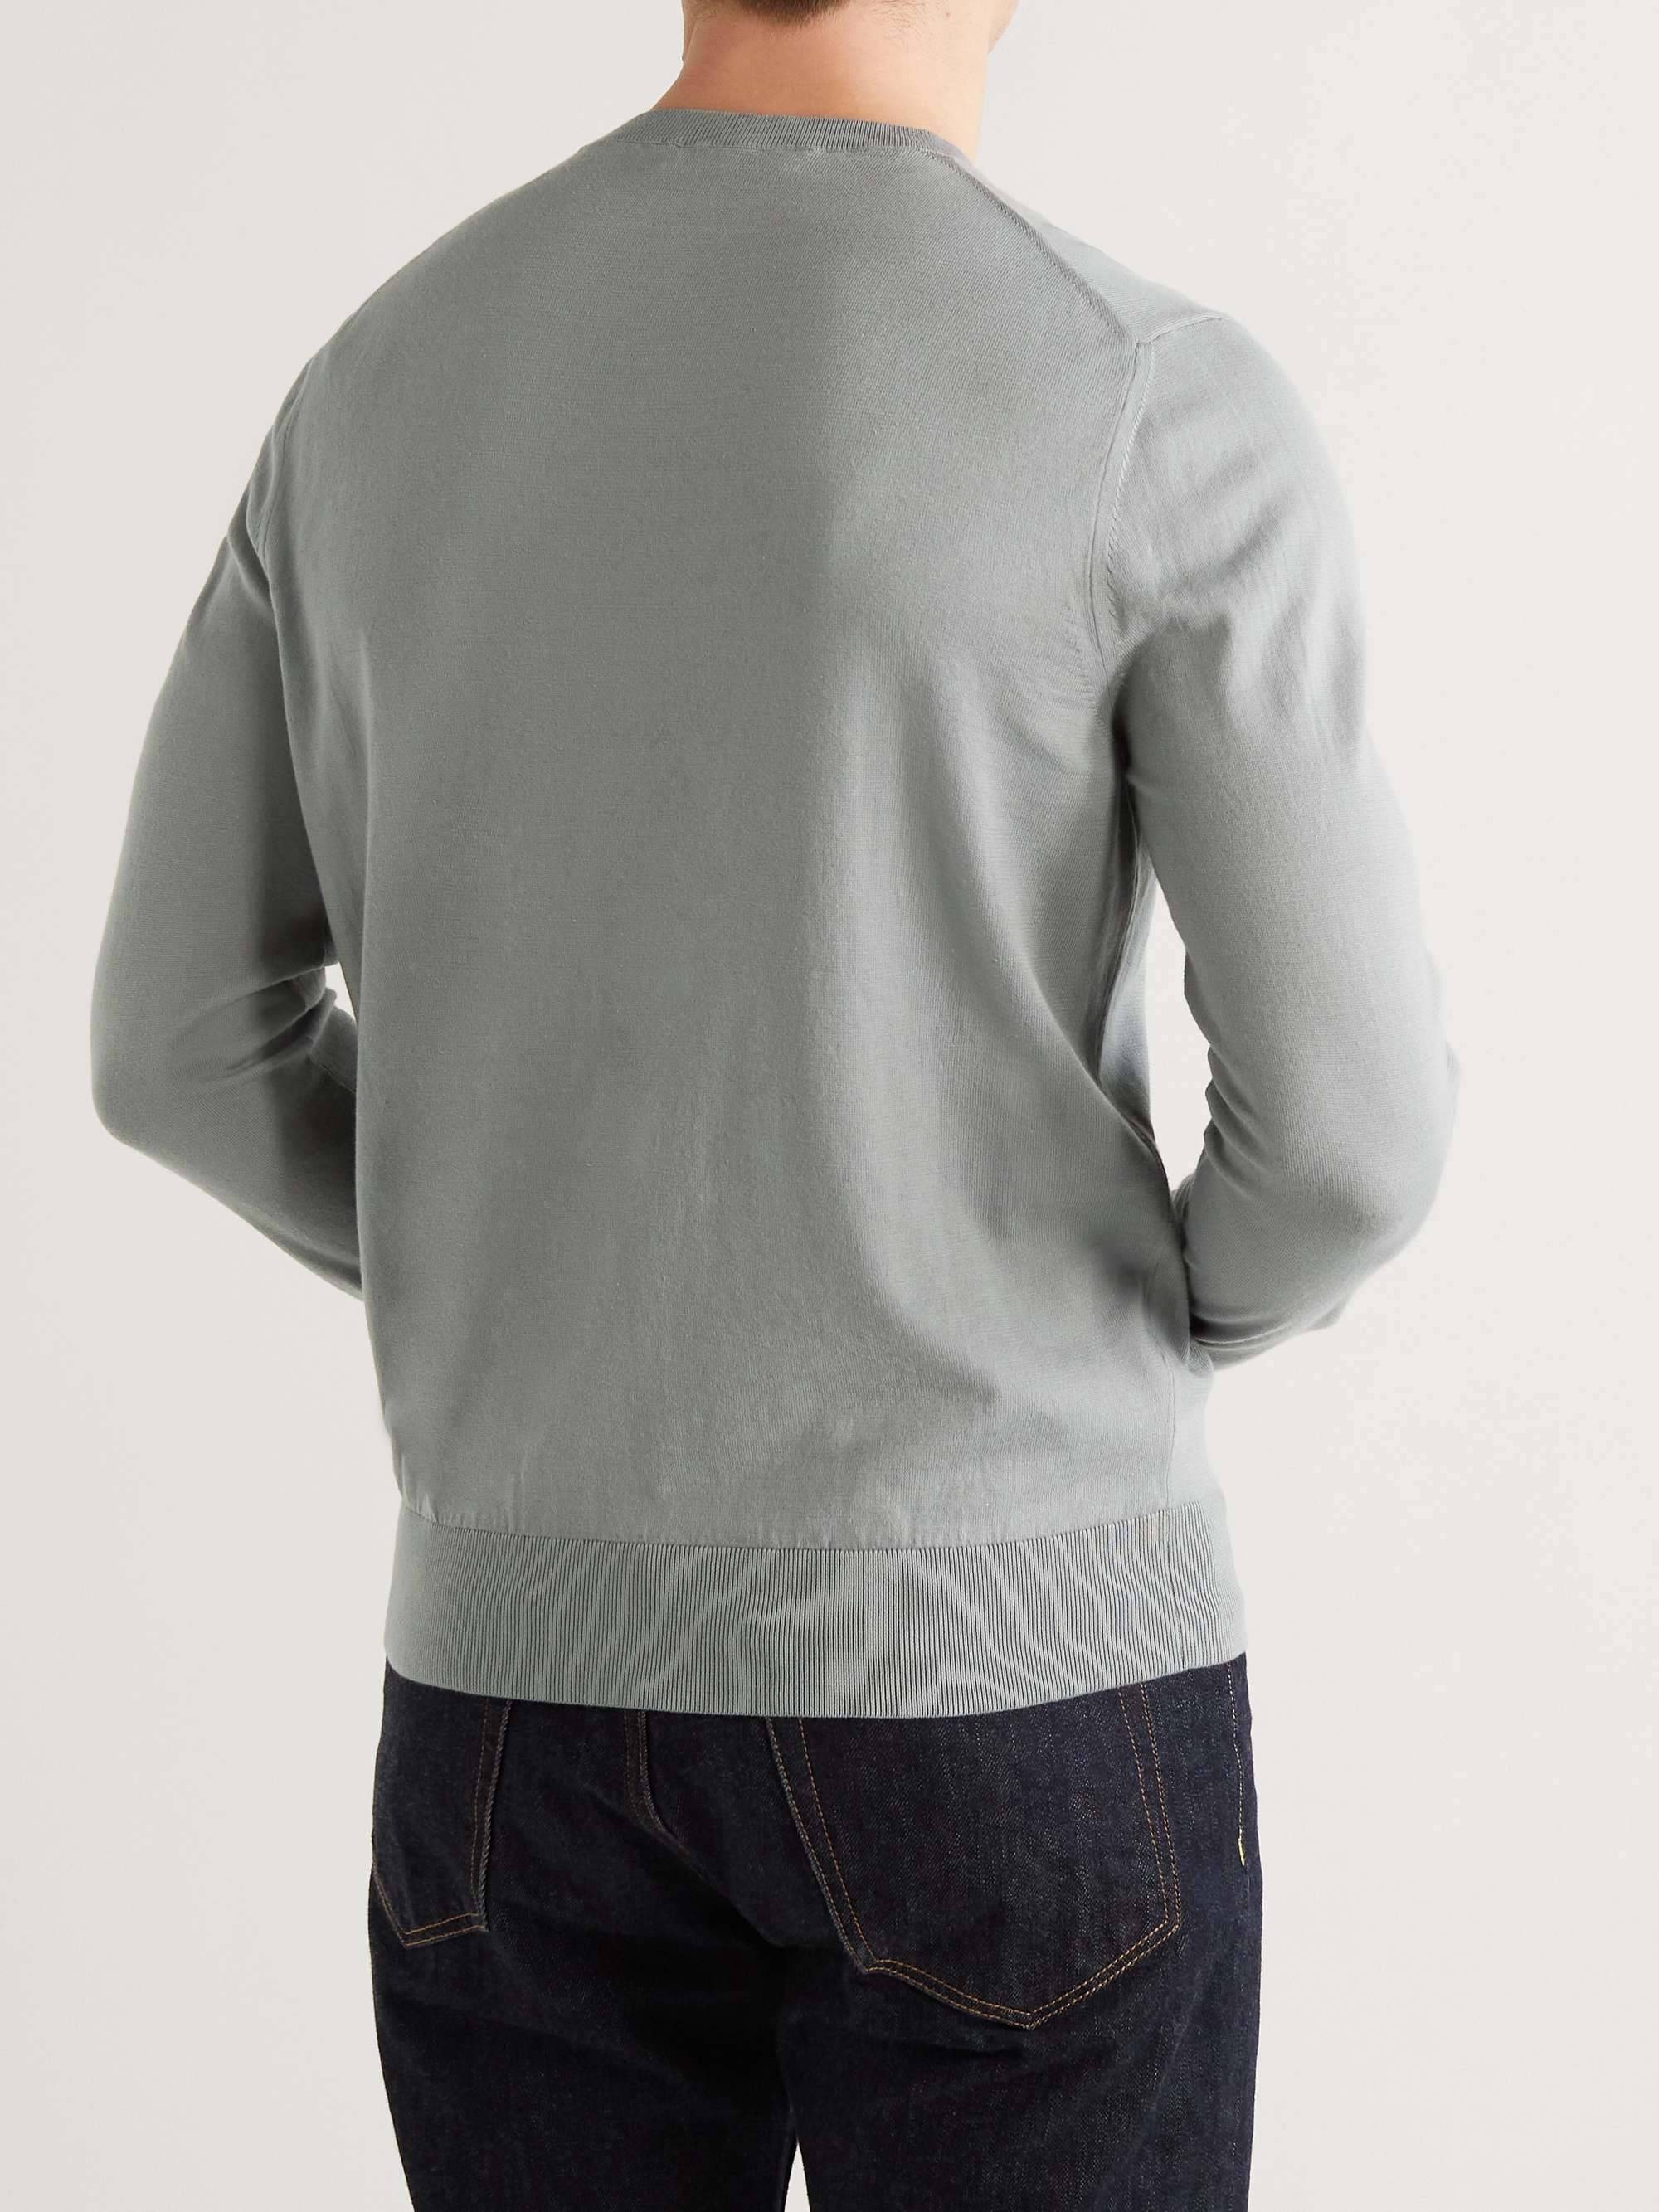 ZEGNA Logo-Embroidered Cotton Sweater